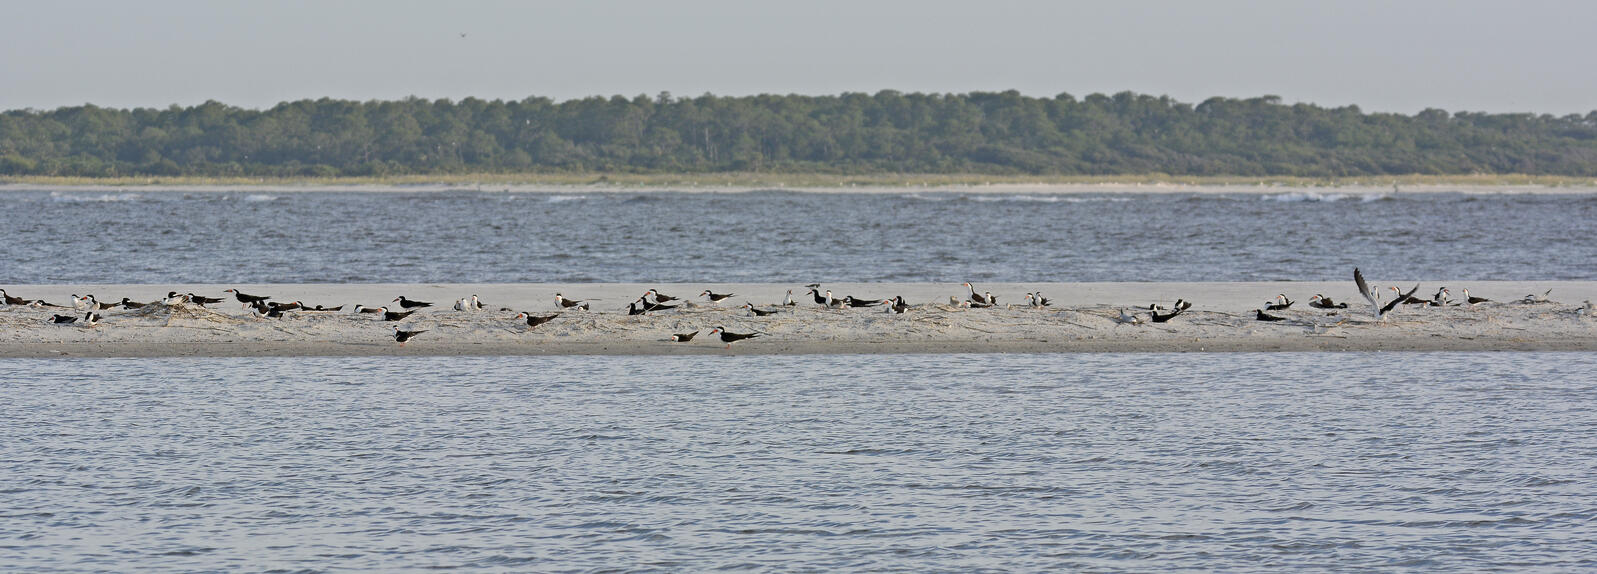 Sea and shorebirds sit on a sandy island surrounded by water.